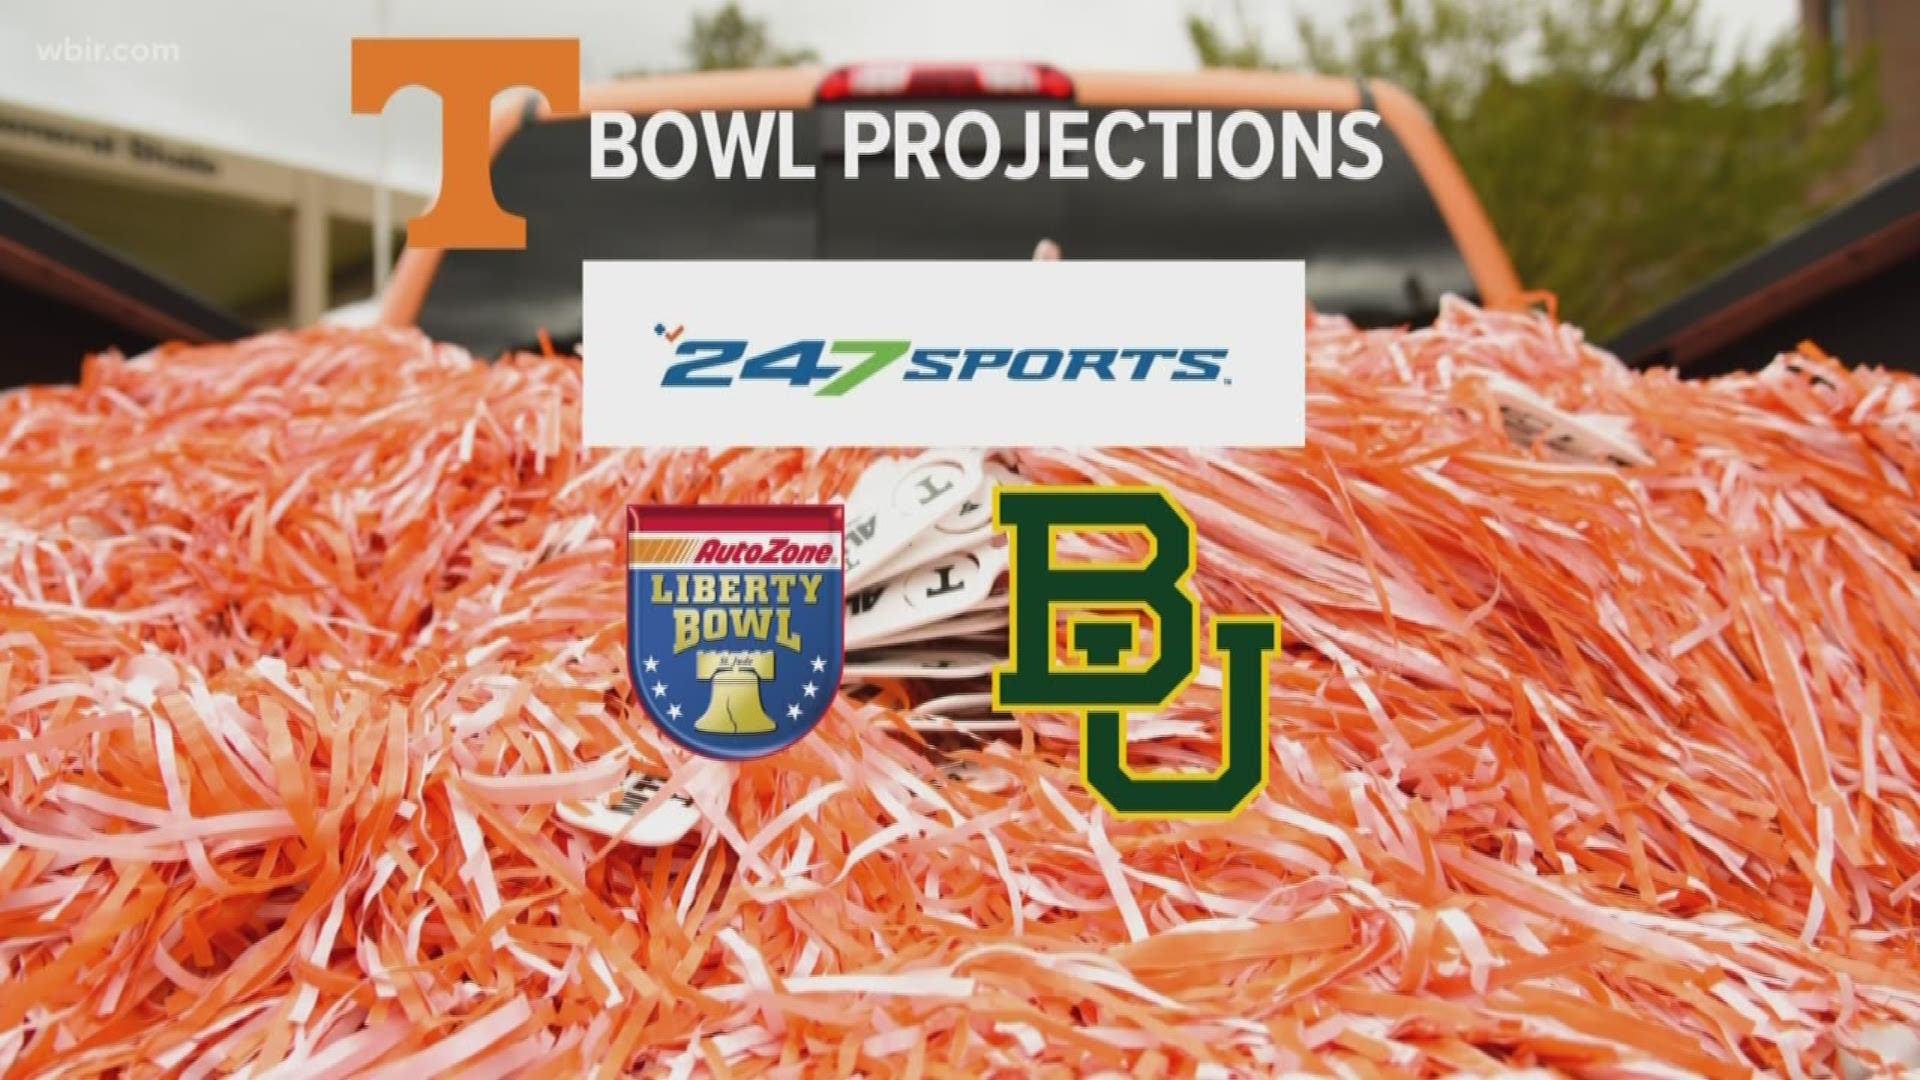 Tennessee needs one win in its final two games to earn a bowl bid. Here are the bowl projections from national media outlets as of November 12, 2018.